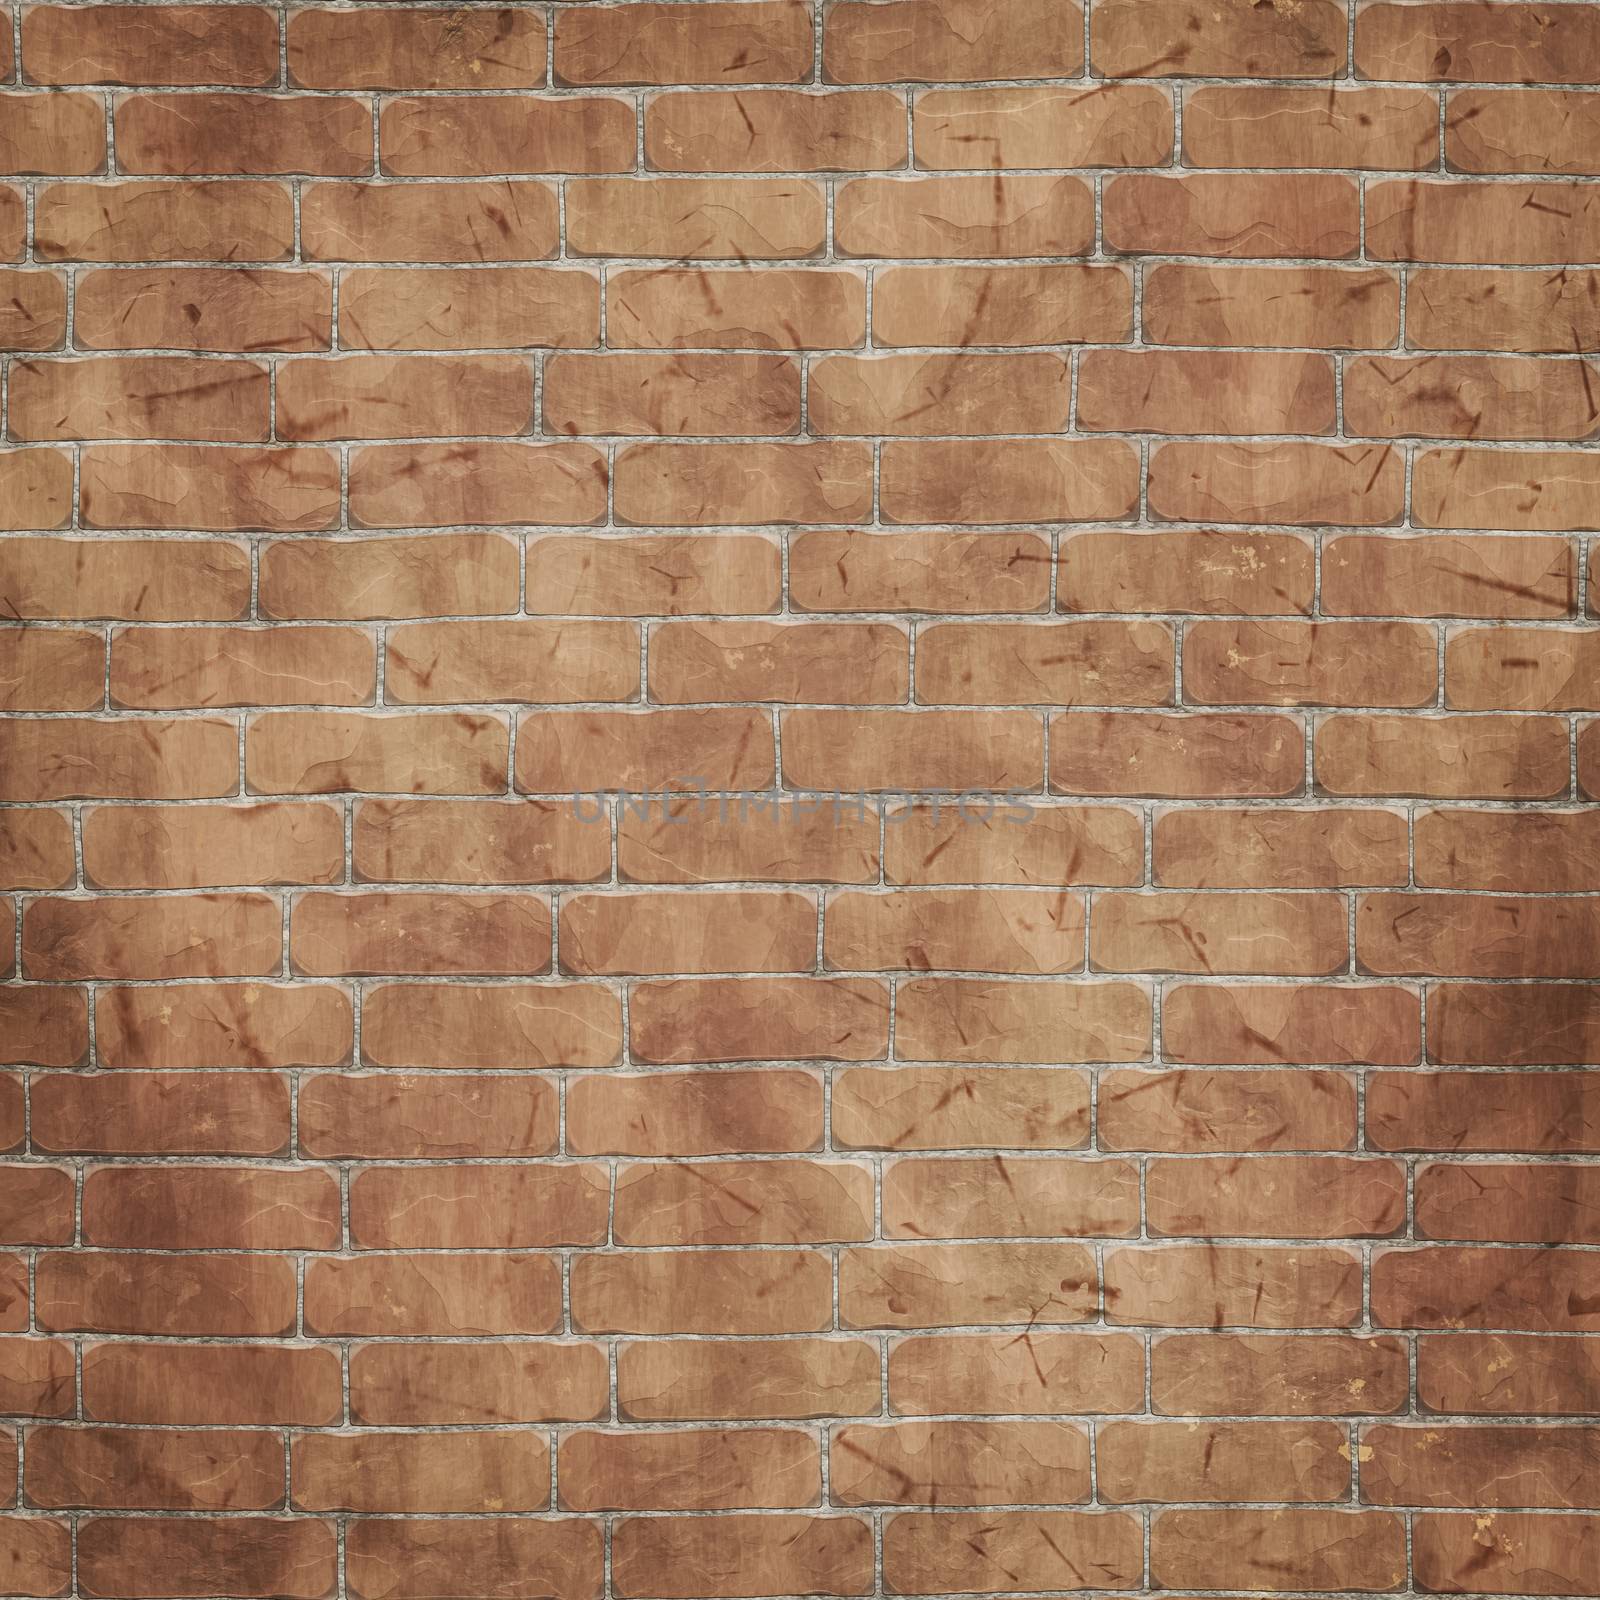 2d illustration of a brick wall background